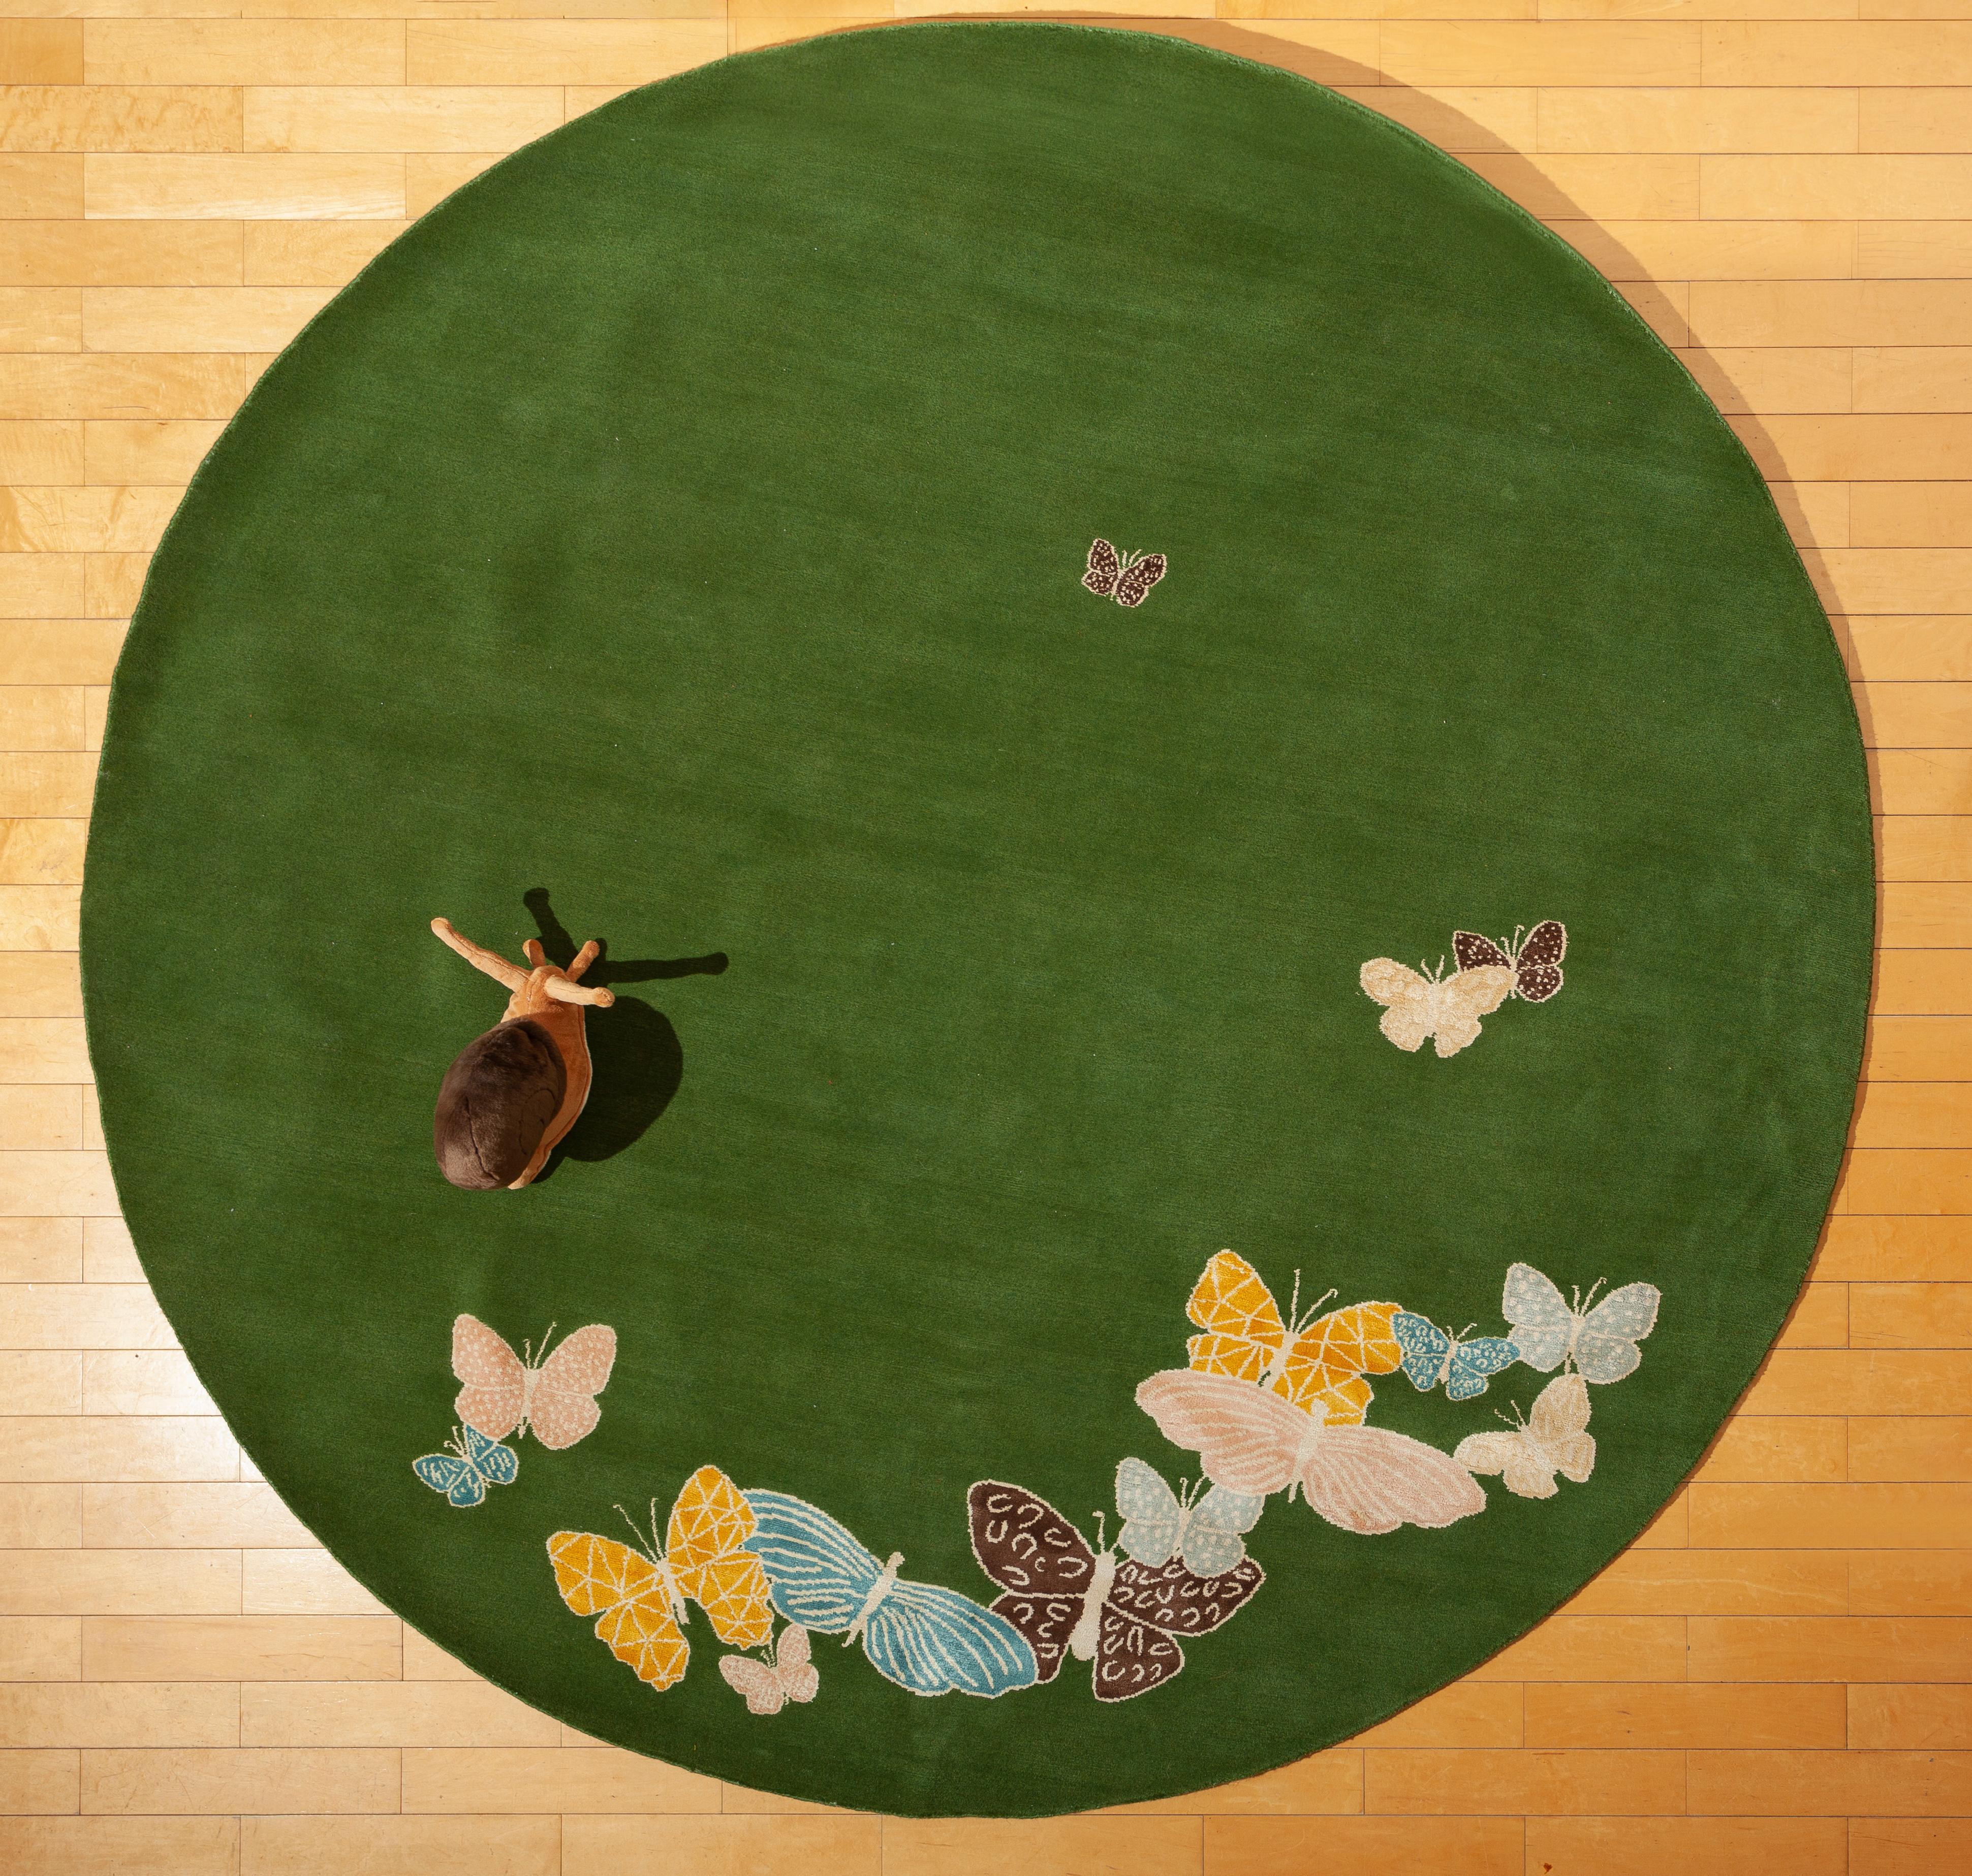 Sergio Mannino Studio's collection of rugs is expanded with new designs. (See storefront to look at other items).
Hand-drawn butterflies seem to come out of the floor. The background is wool, while the butterflies are made with a silk thread.

Any